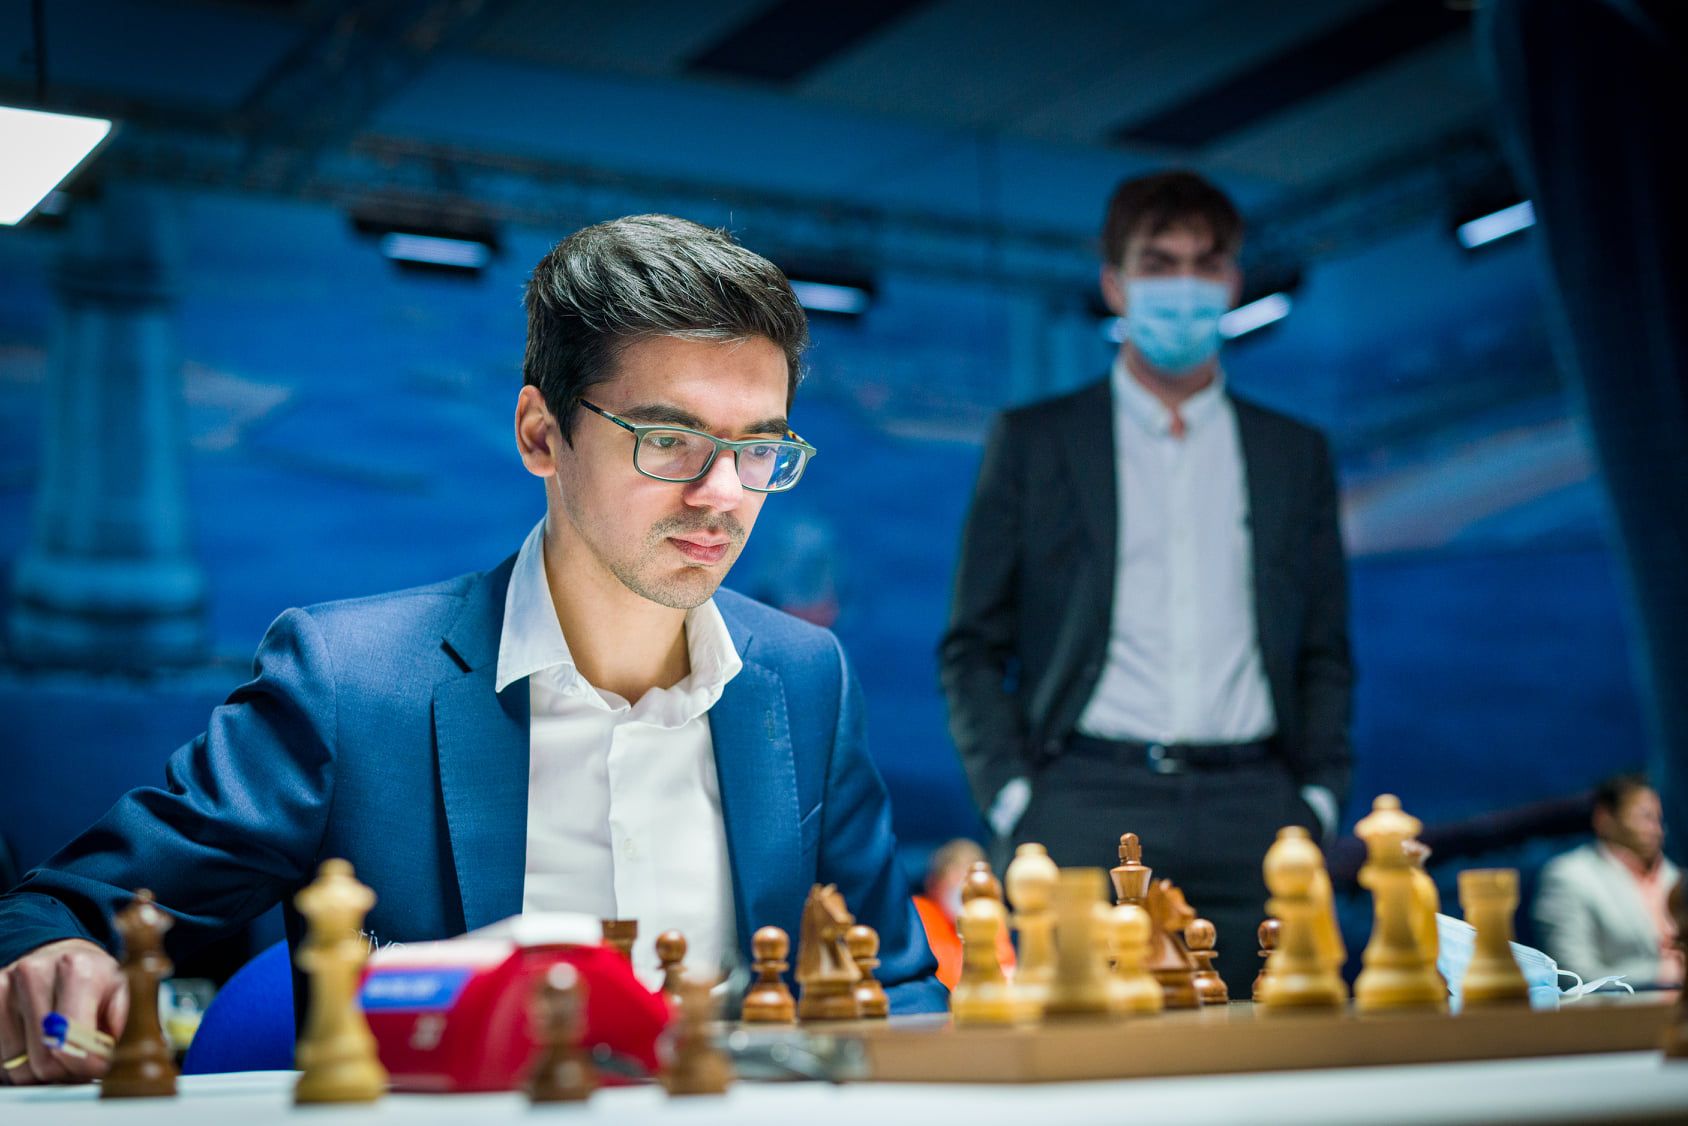 7 Reasons To Watch Tata Steel Chess 2022 On  